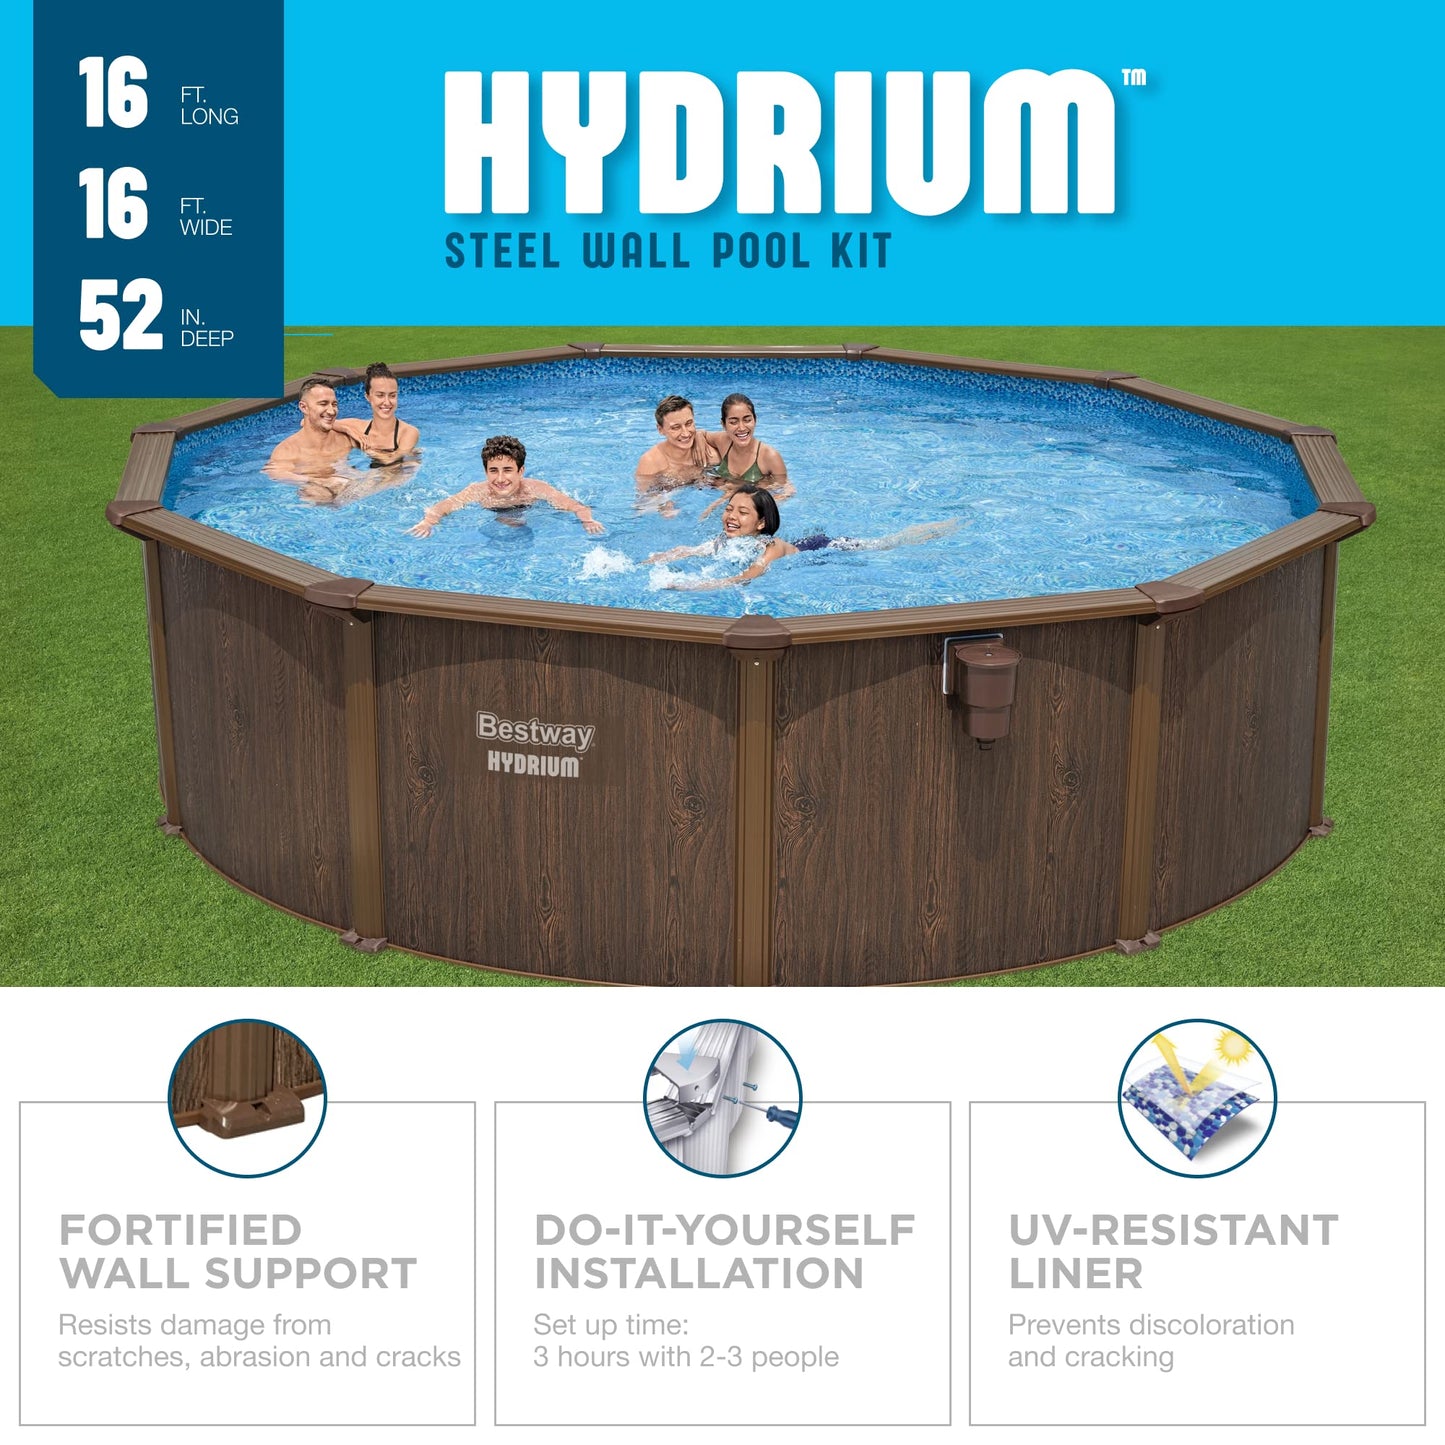 Bestway Hydrium Galvanized Steel Wall Above Ground Pool Set 16' x 52" | Semi-Permanent, Year-Round Swimming Pool | Includes Sand Filter, Skimmer, Ladder, Ground Cloth, Cover